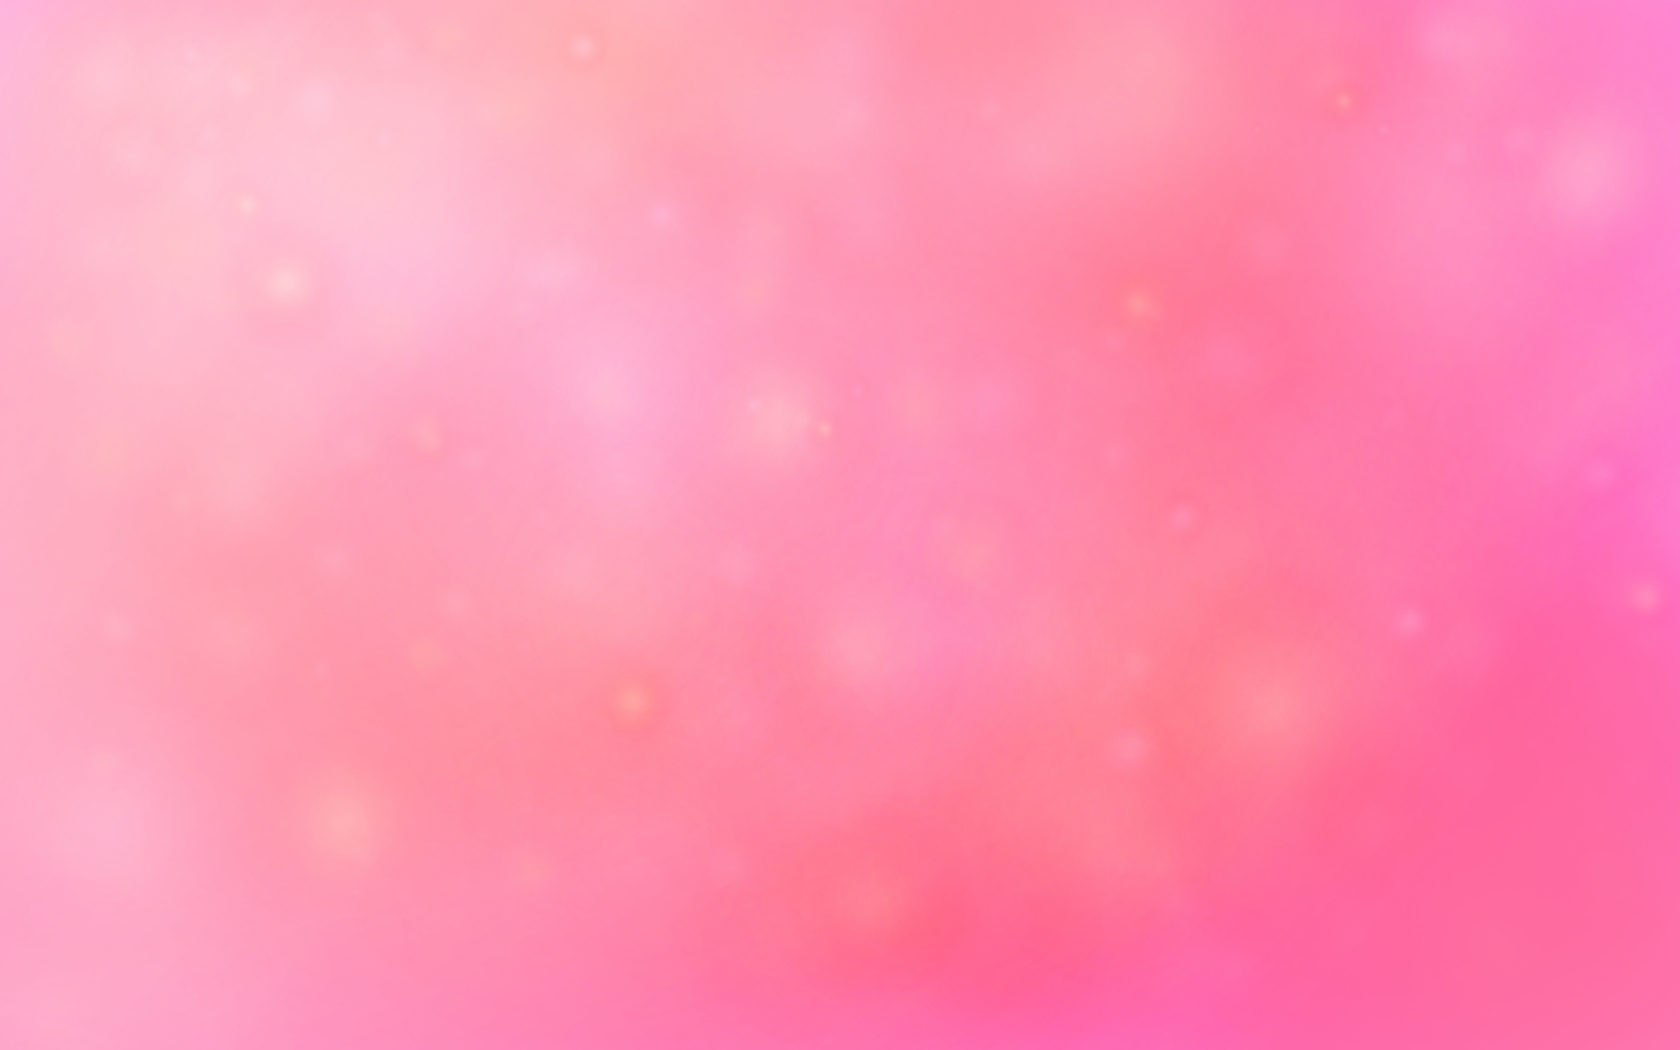 Simple Pink Background Has No Extra Decorations Is Easy To Apply A